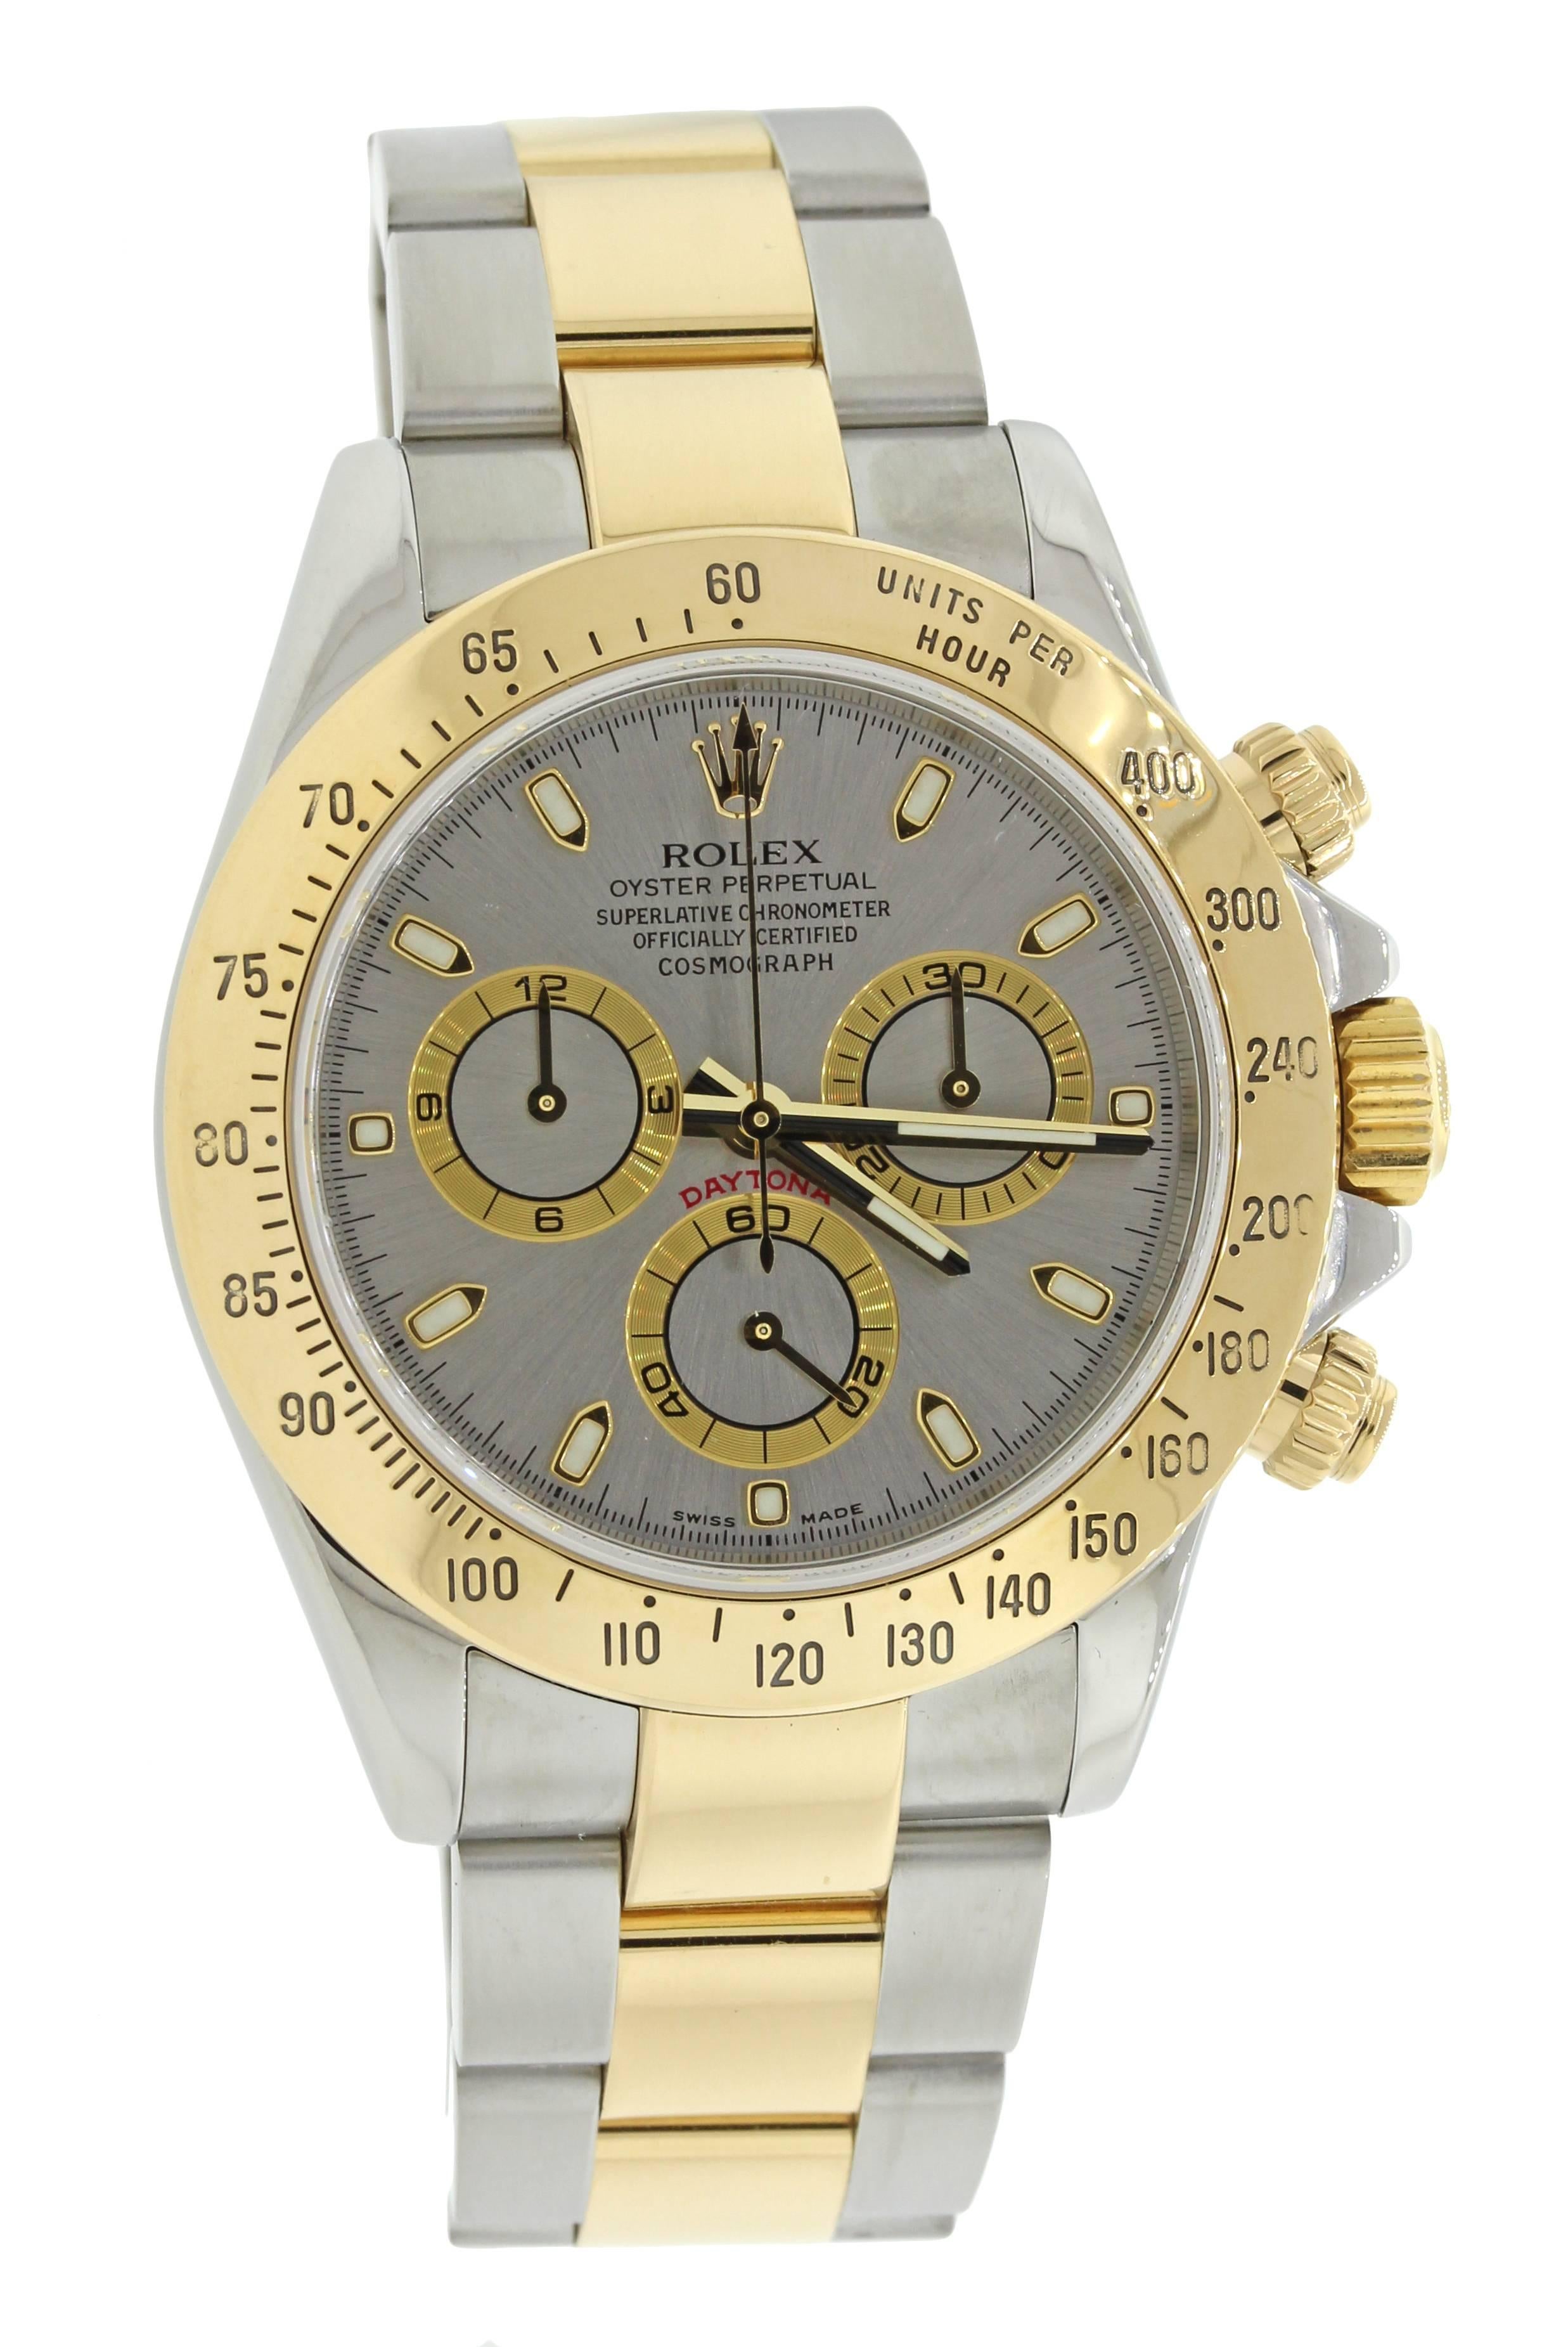 Modern Rolex Daytona Cosmograph 116523 Silver Steel Gold Two Tone Watch Box Papers